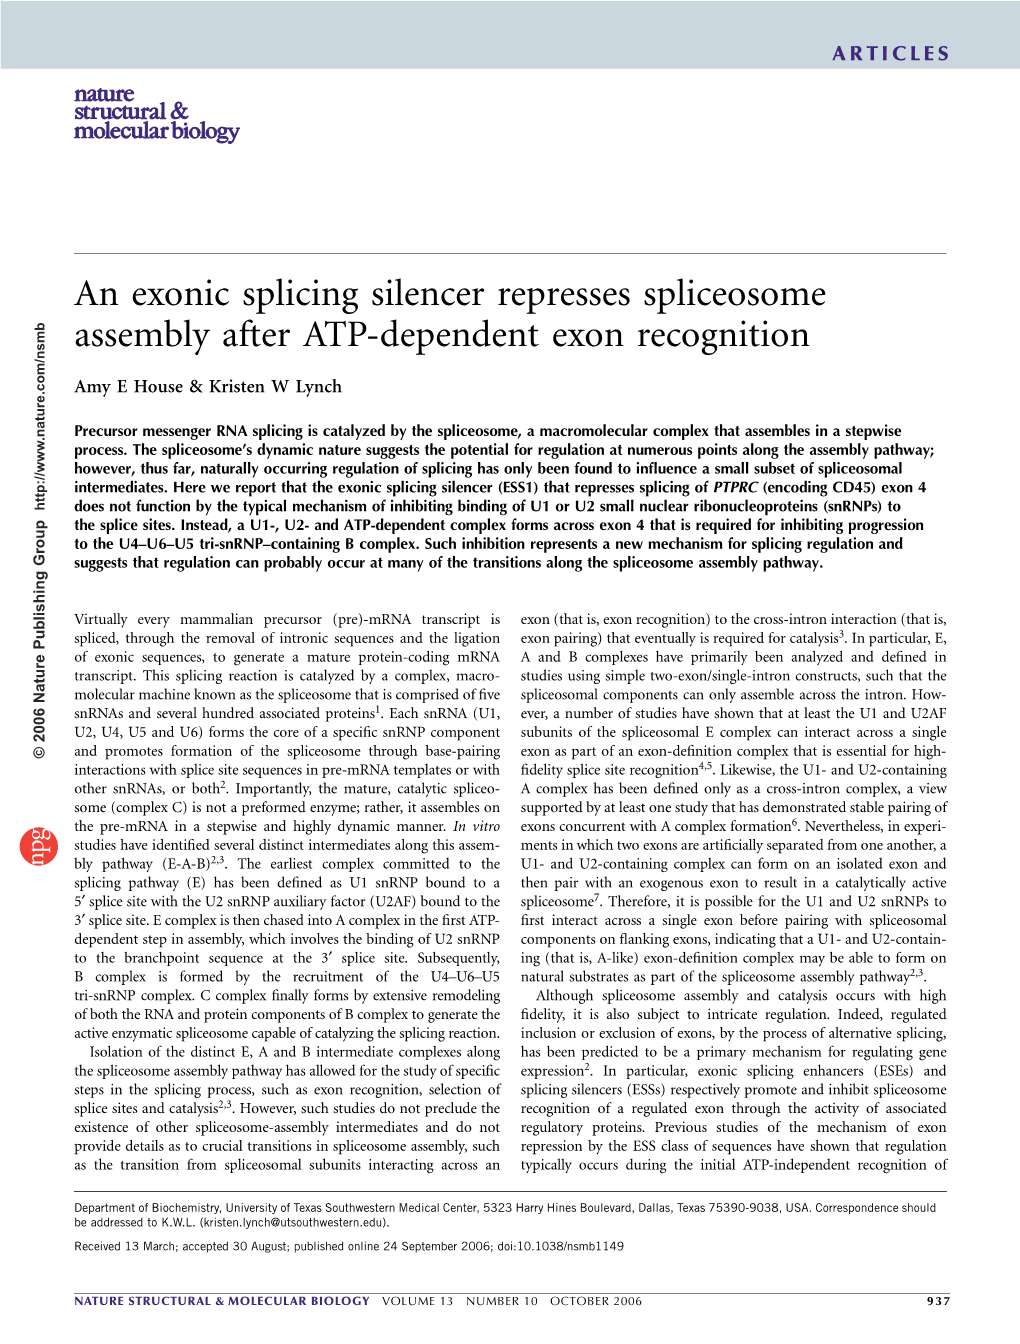 An Exonic Splicing Silencer Represses Spliceosome Assembly After ATP-Dependent Exon Recognition